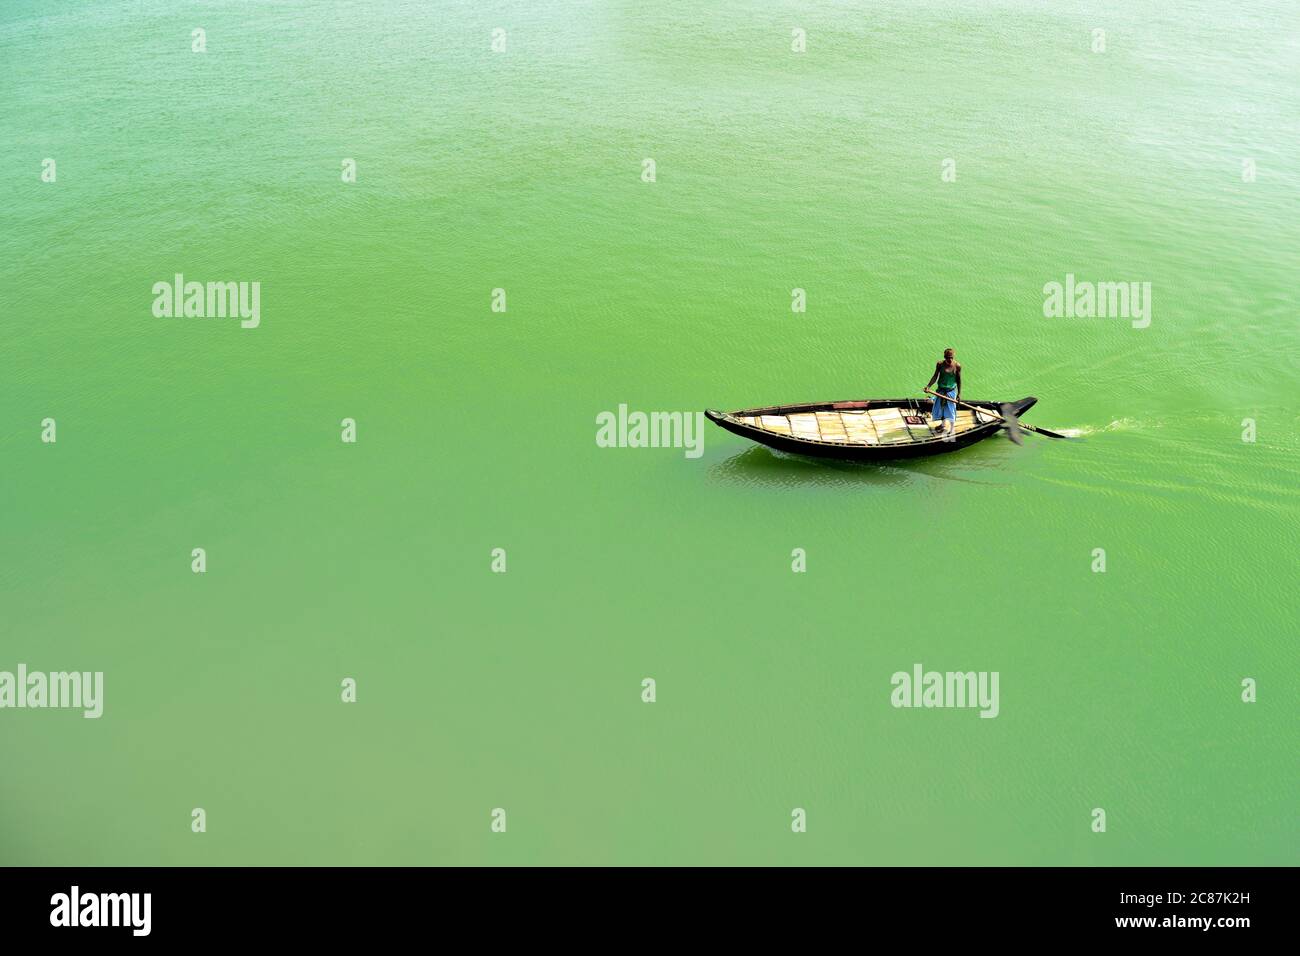 South Asian River Beauty and boat lifestyle Stock Photo